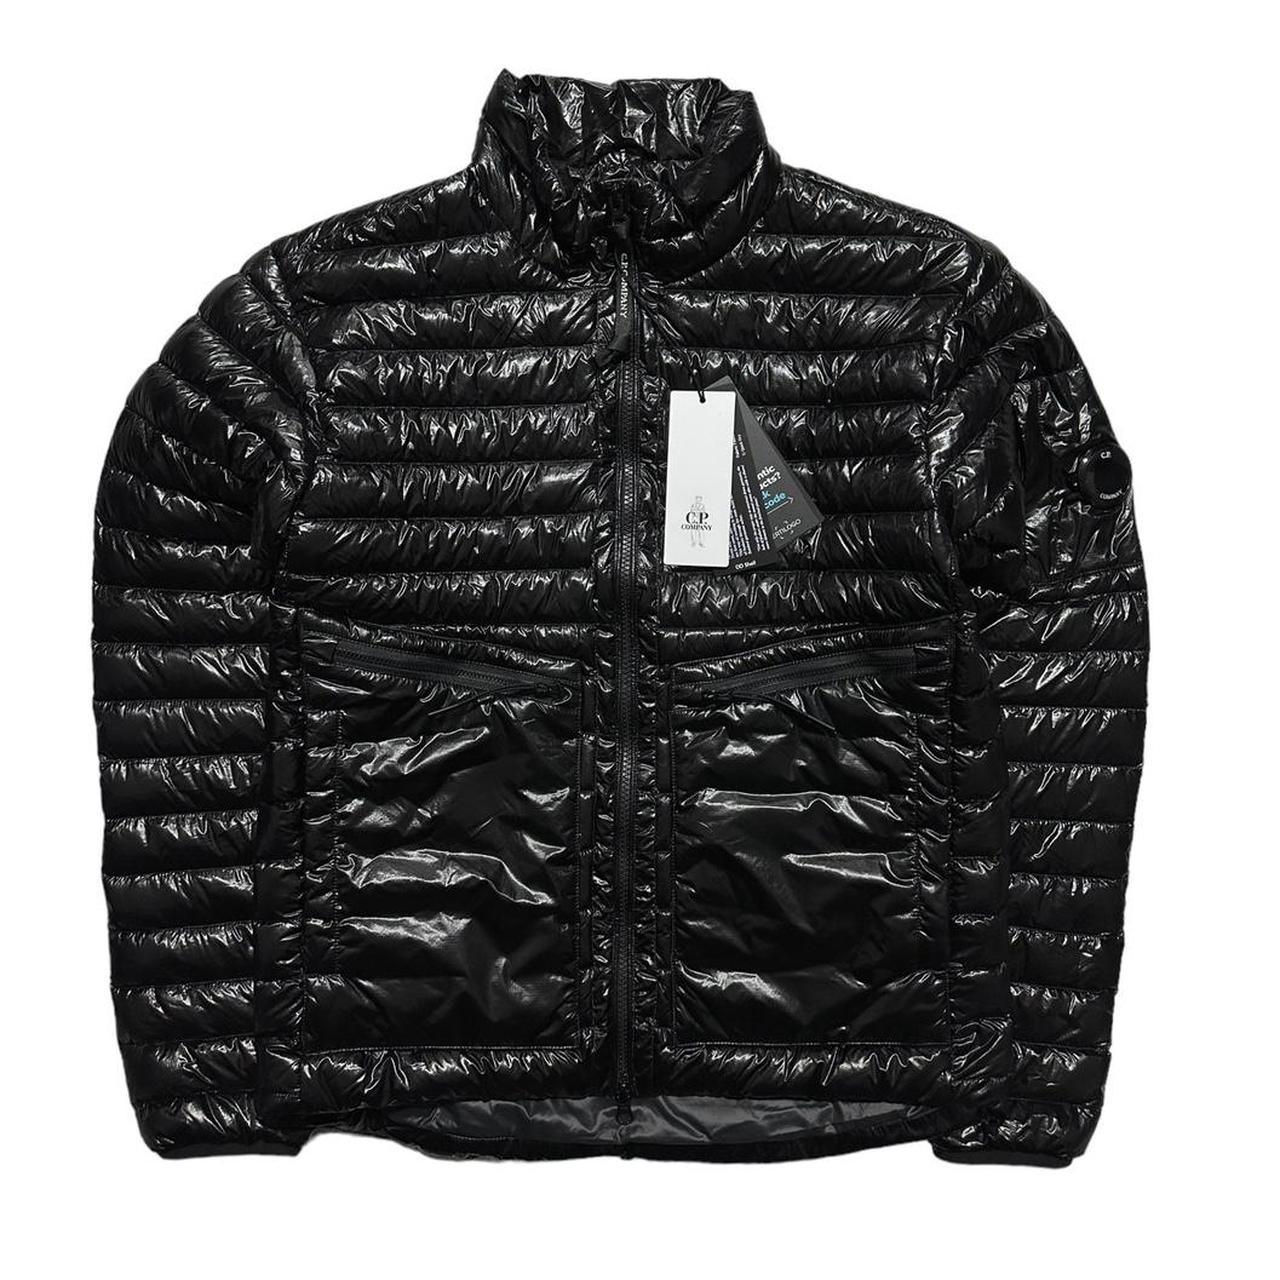 CP Company D.D. Shell Down Jacket - Known Source